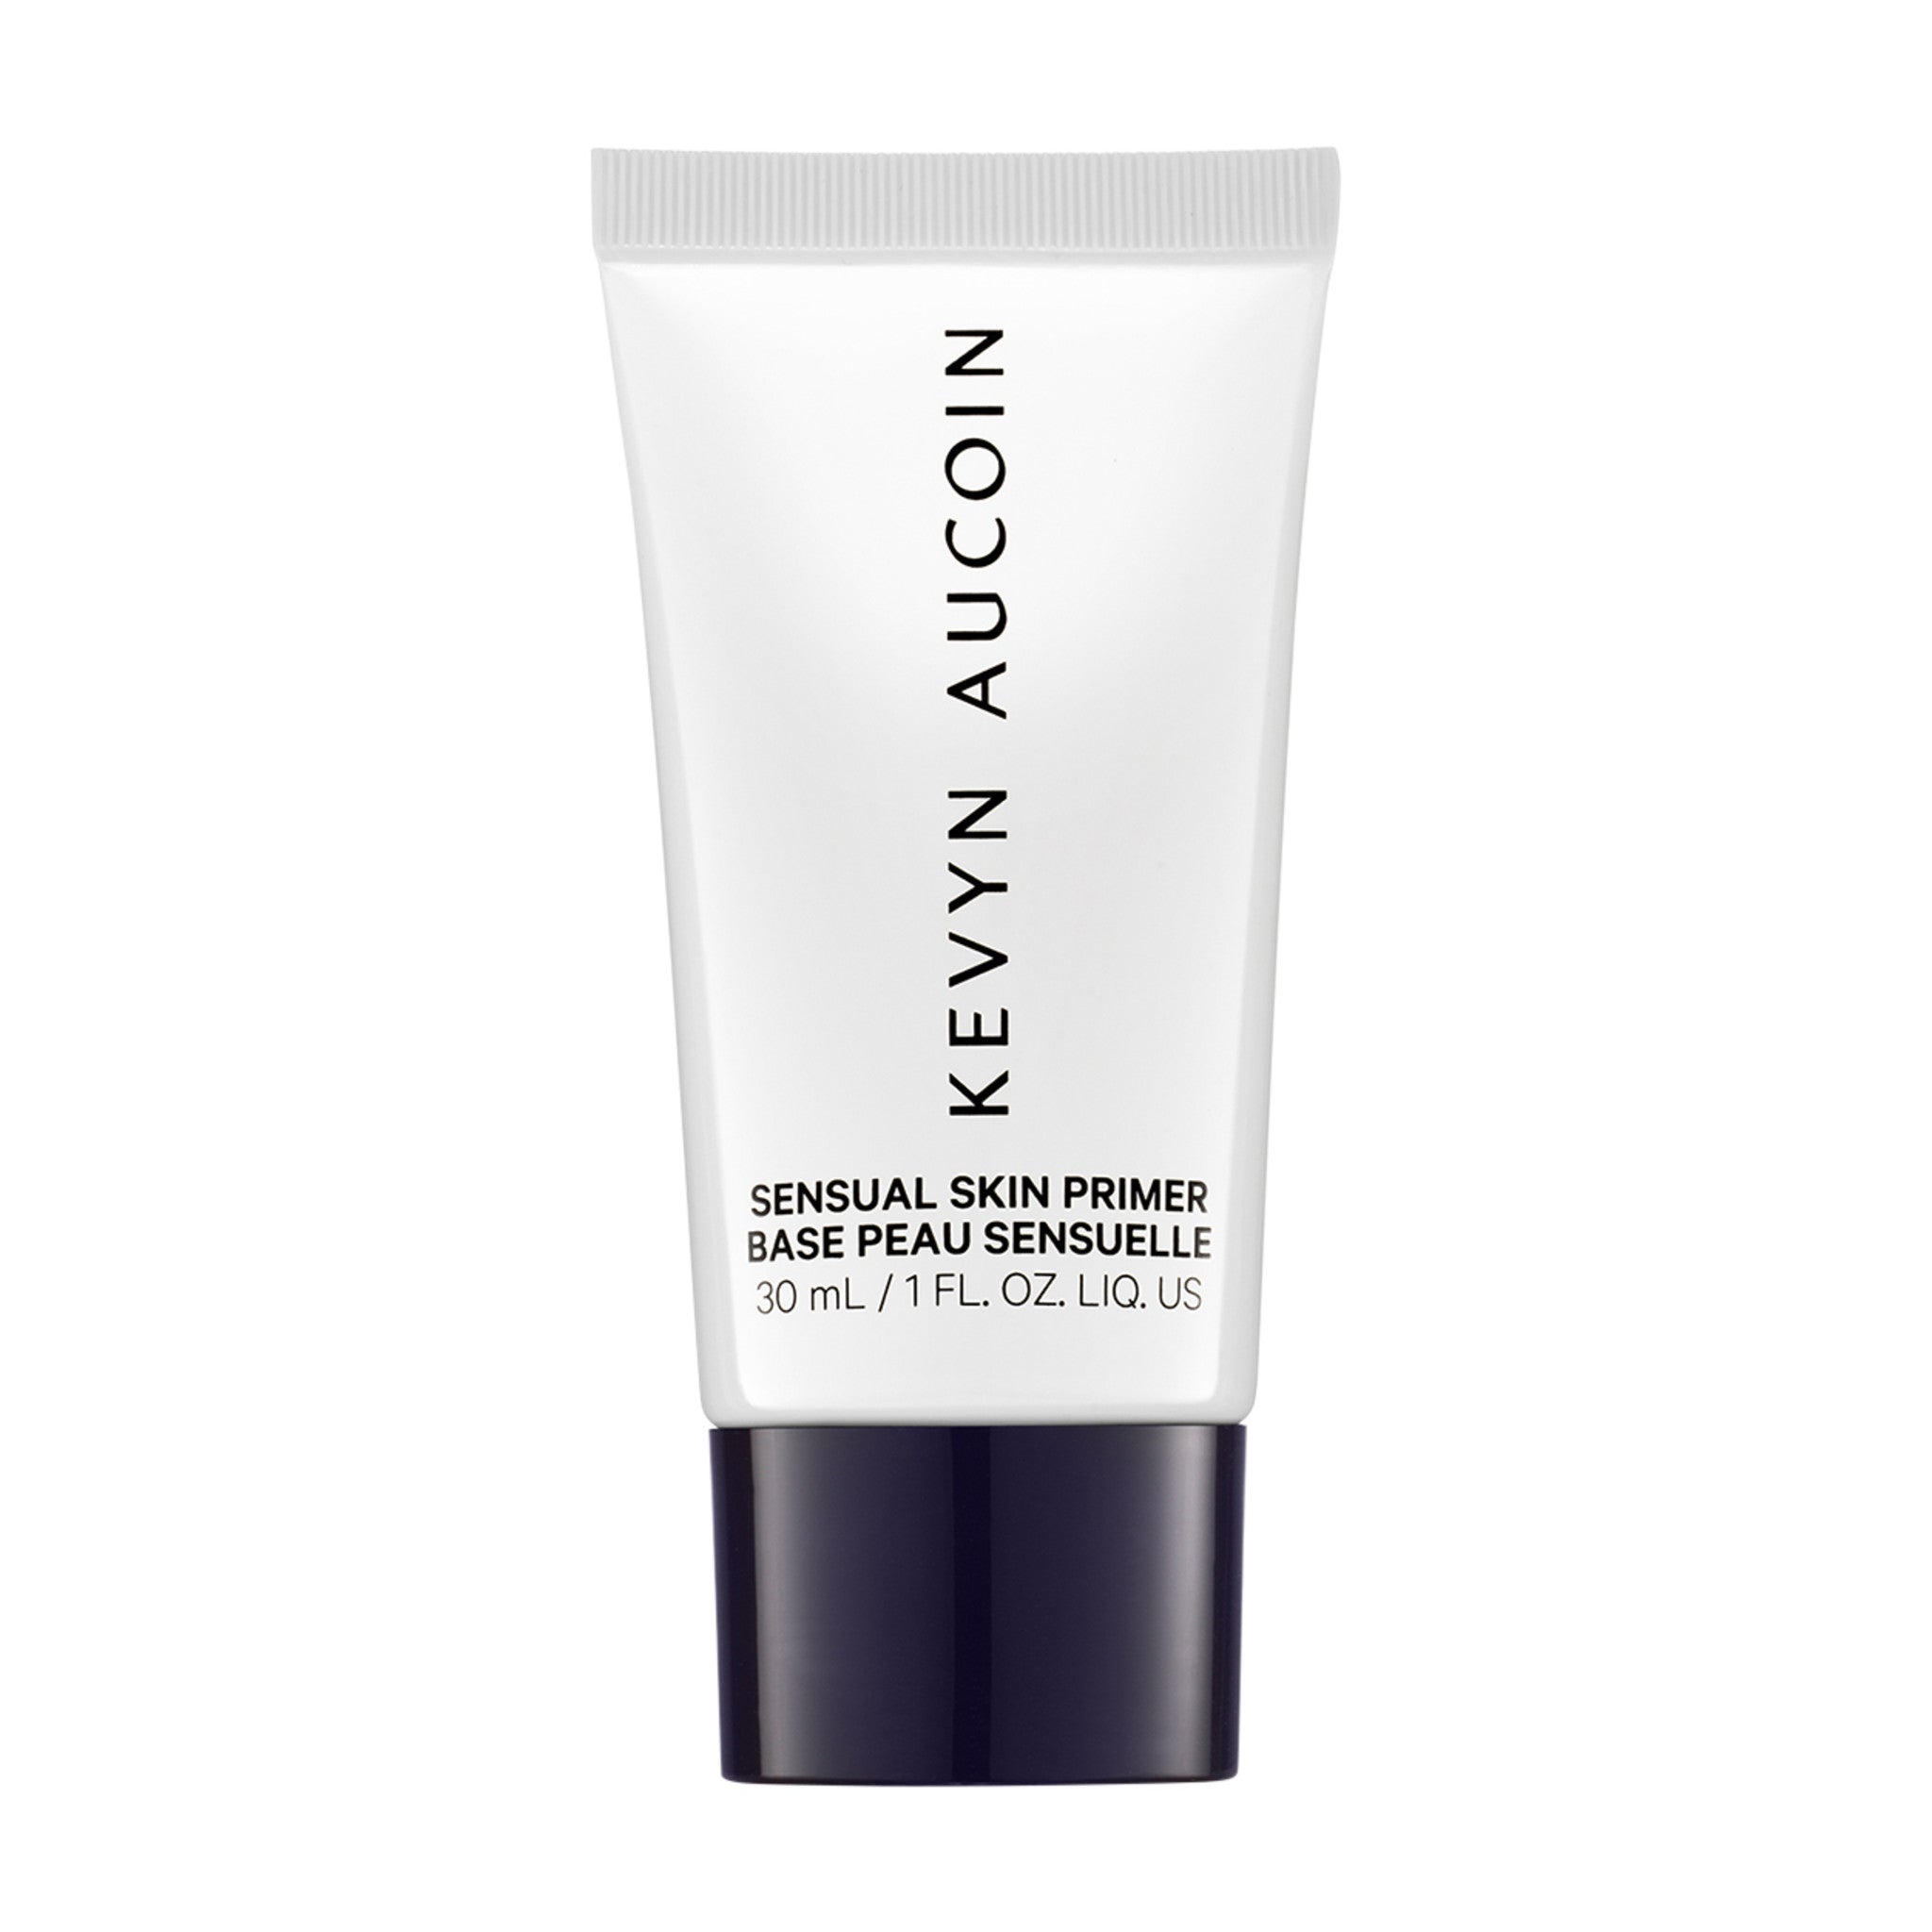 Kevyn Aucoin Sensual Skin Primer main image. This product is in the color clear